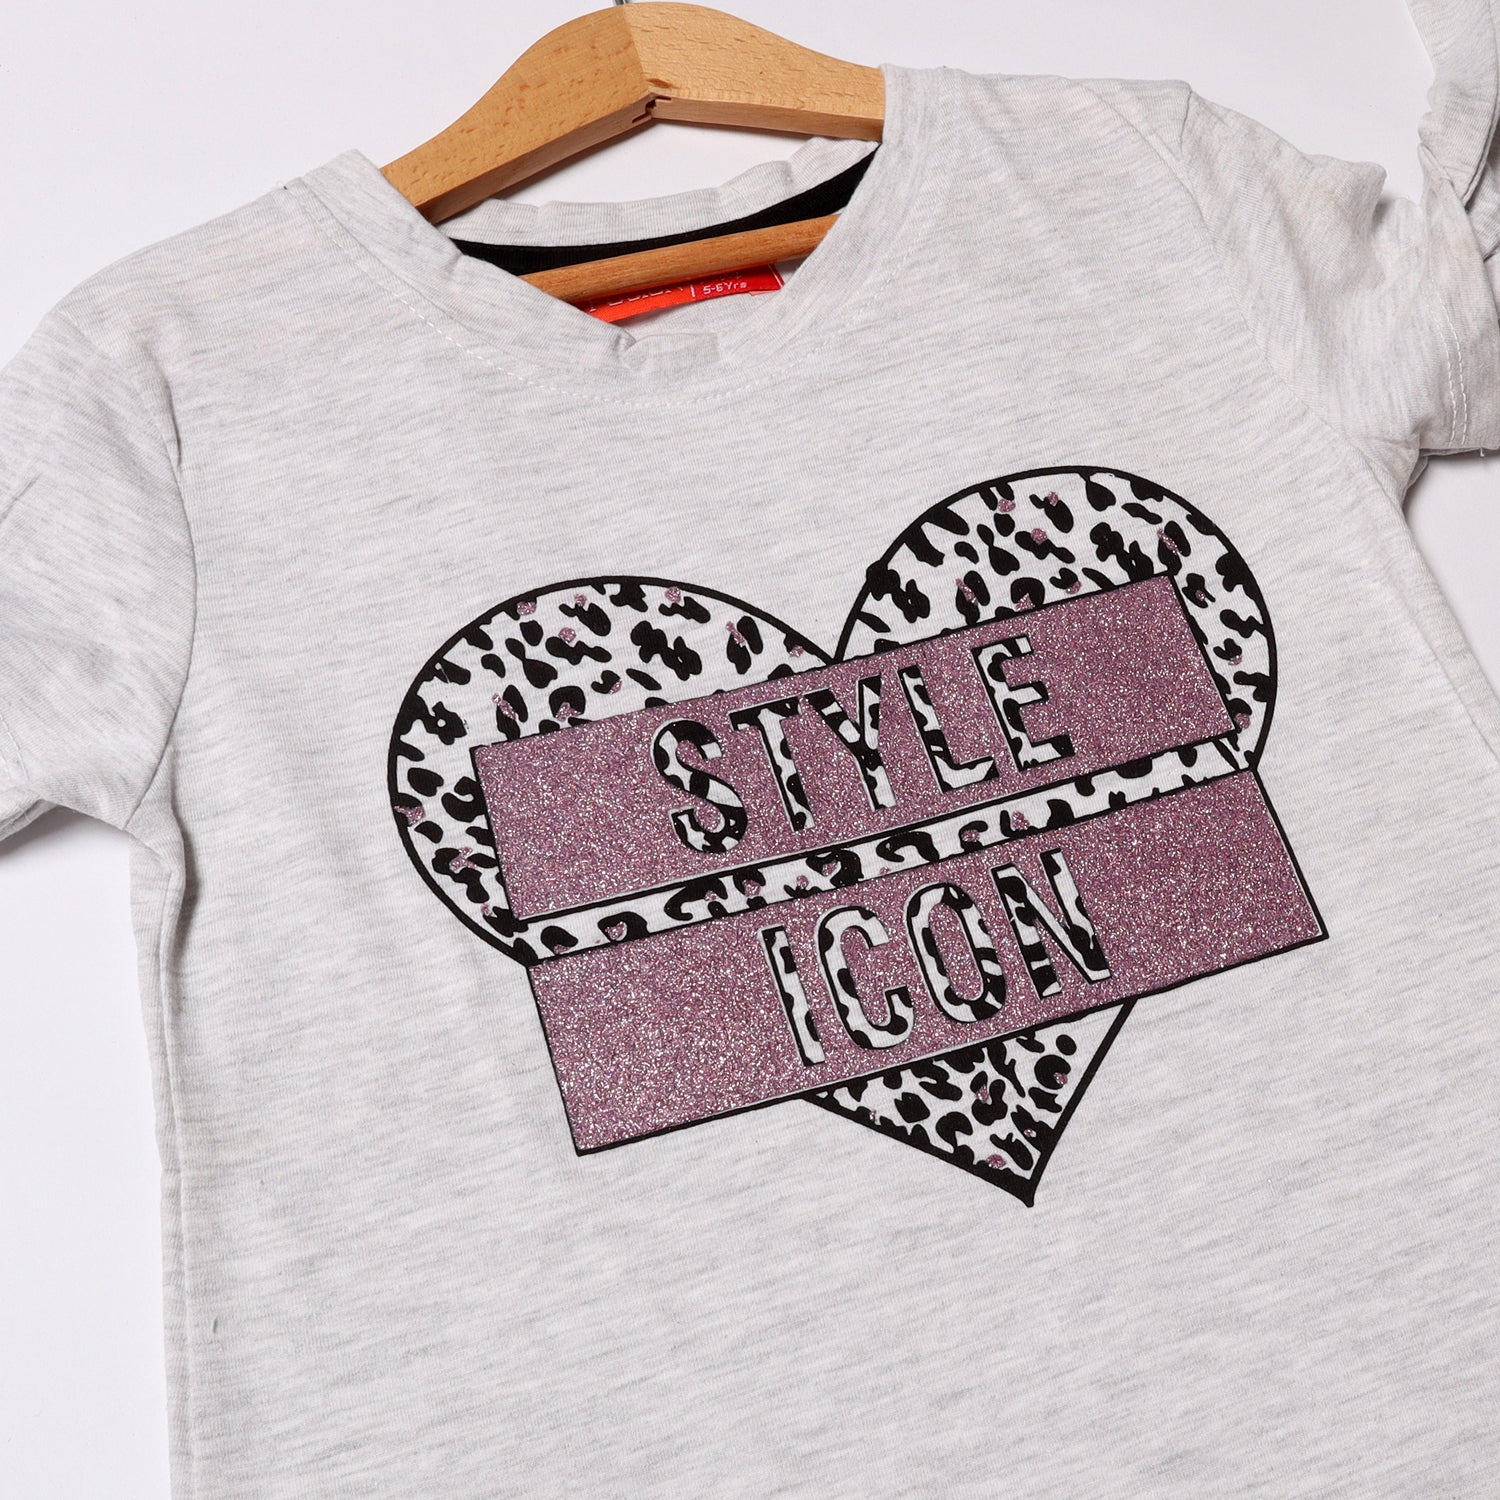 ASH GREY HEART STYLE ICON PRINTED T-SHIRT FOR GIRLS